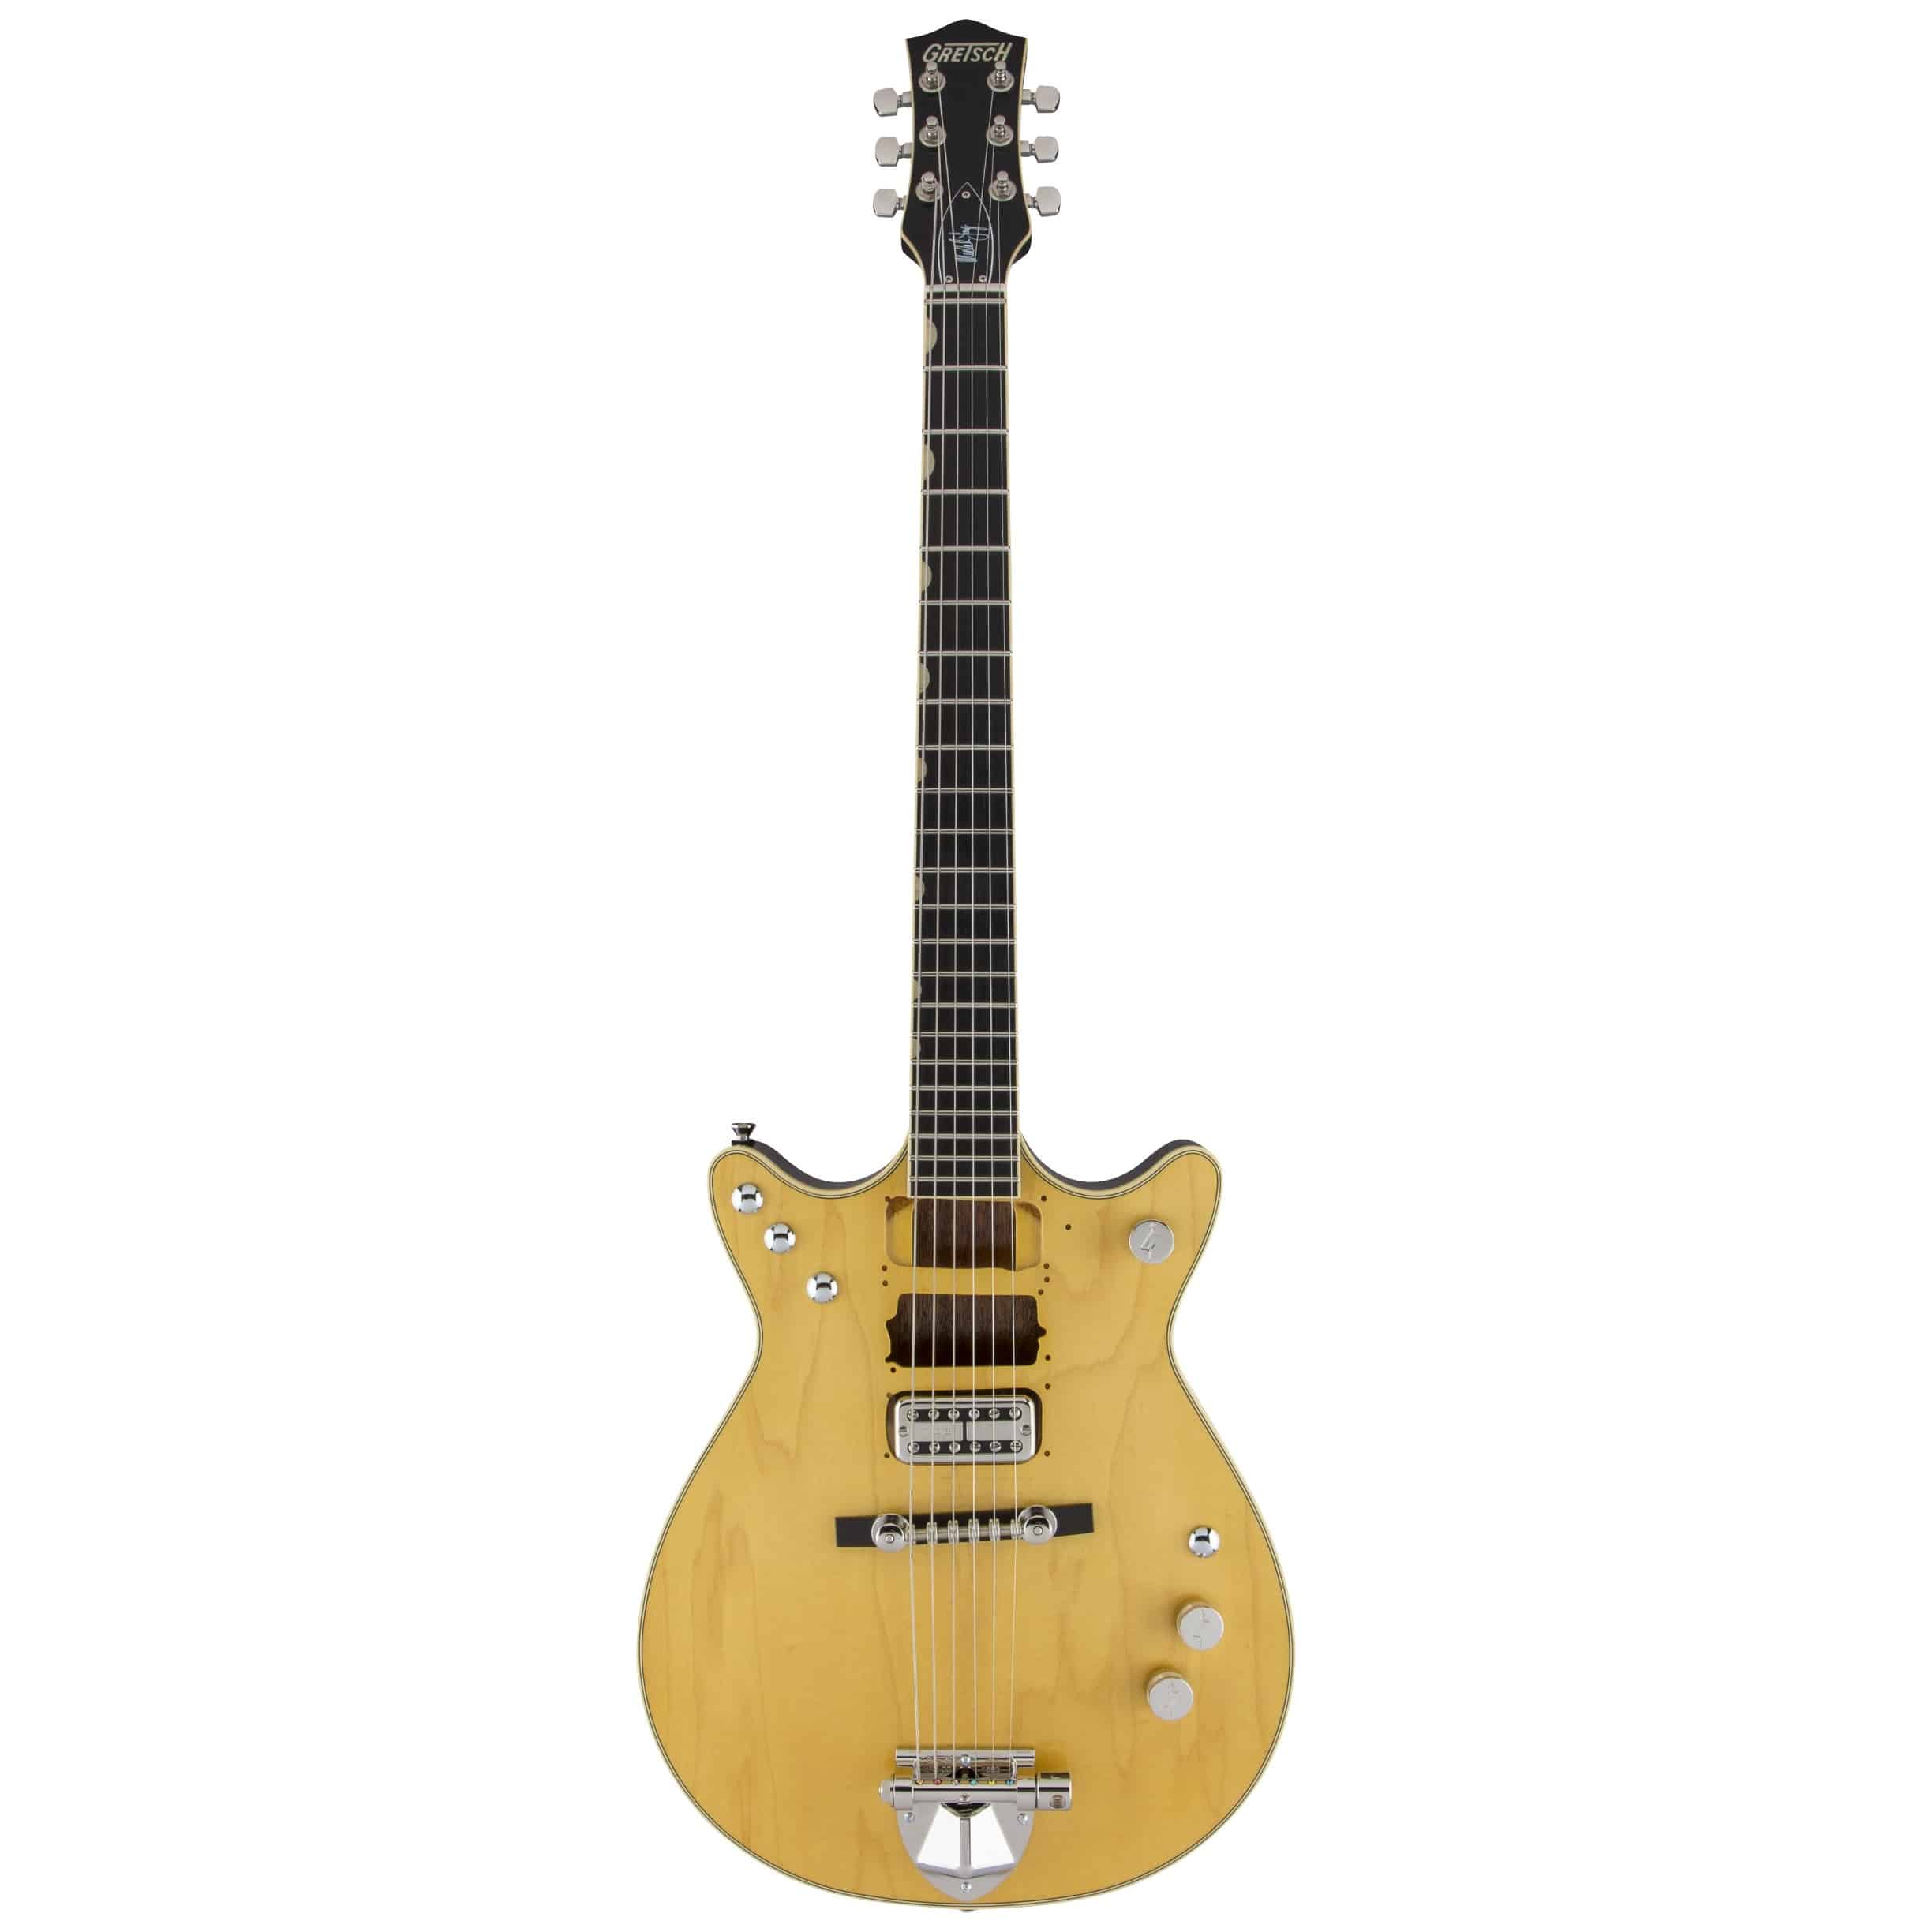 Gretsch G6131-MY Malcolm Young Signature Jet EB NAT